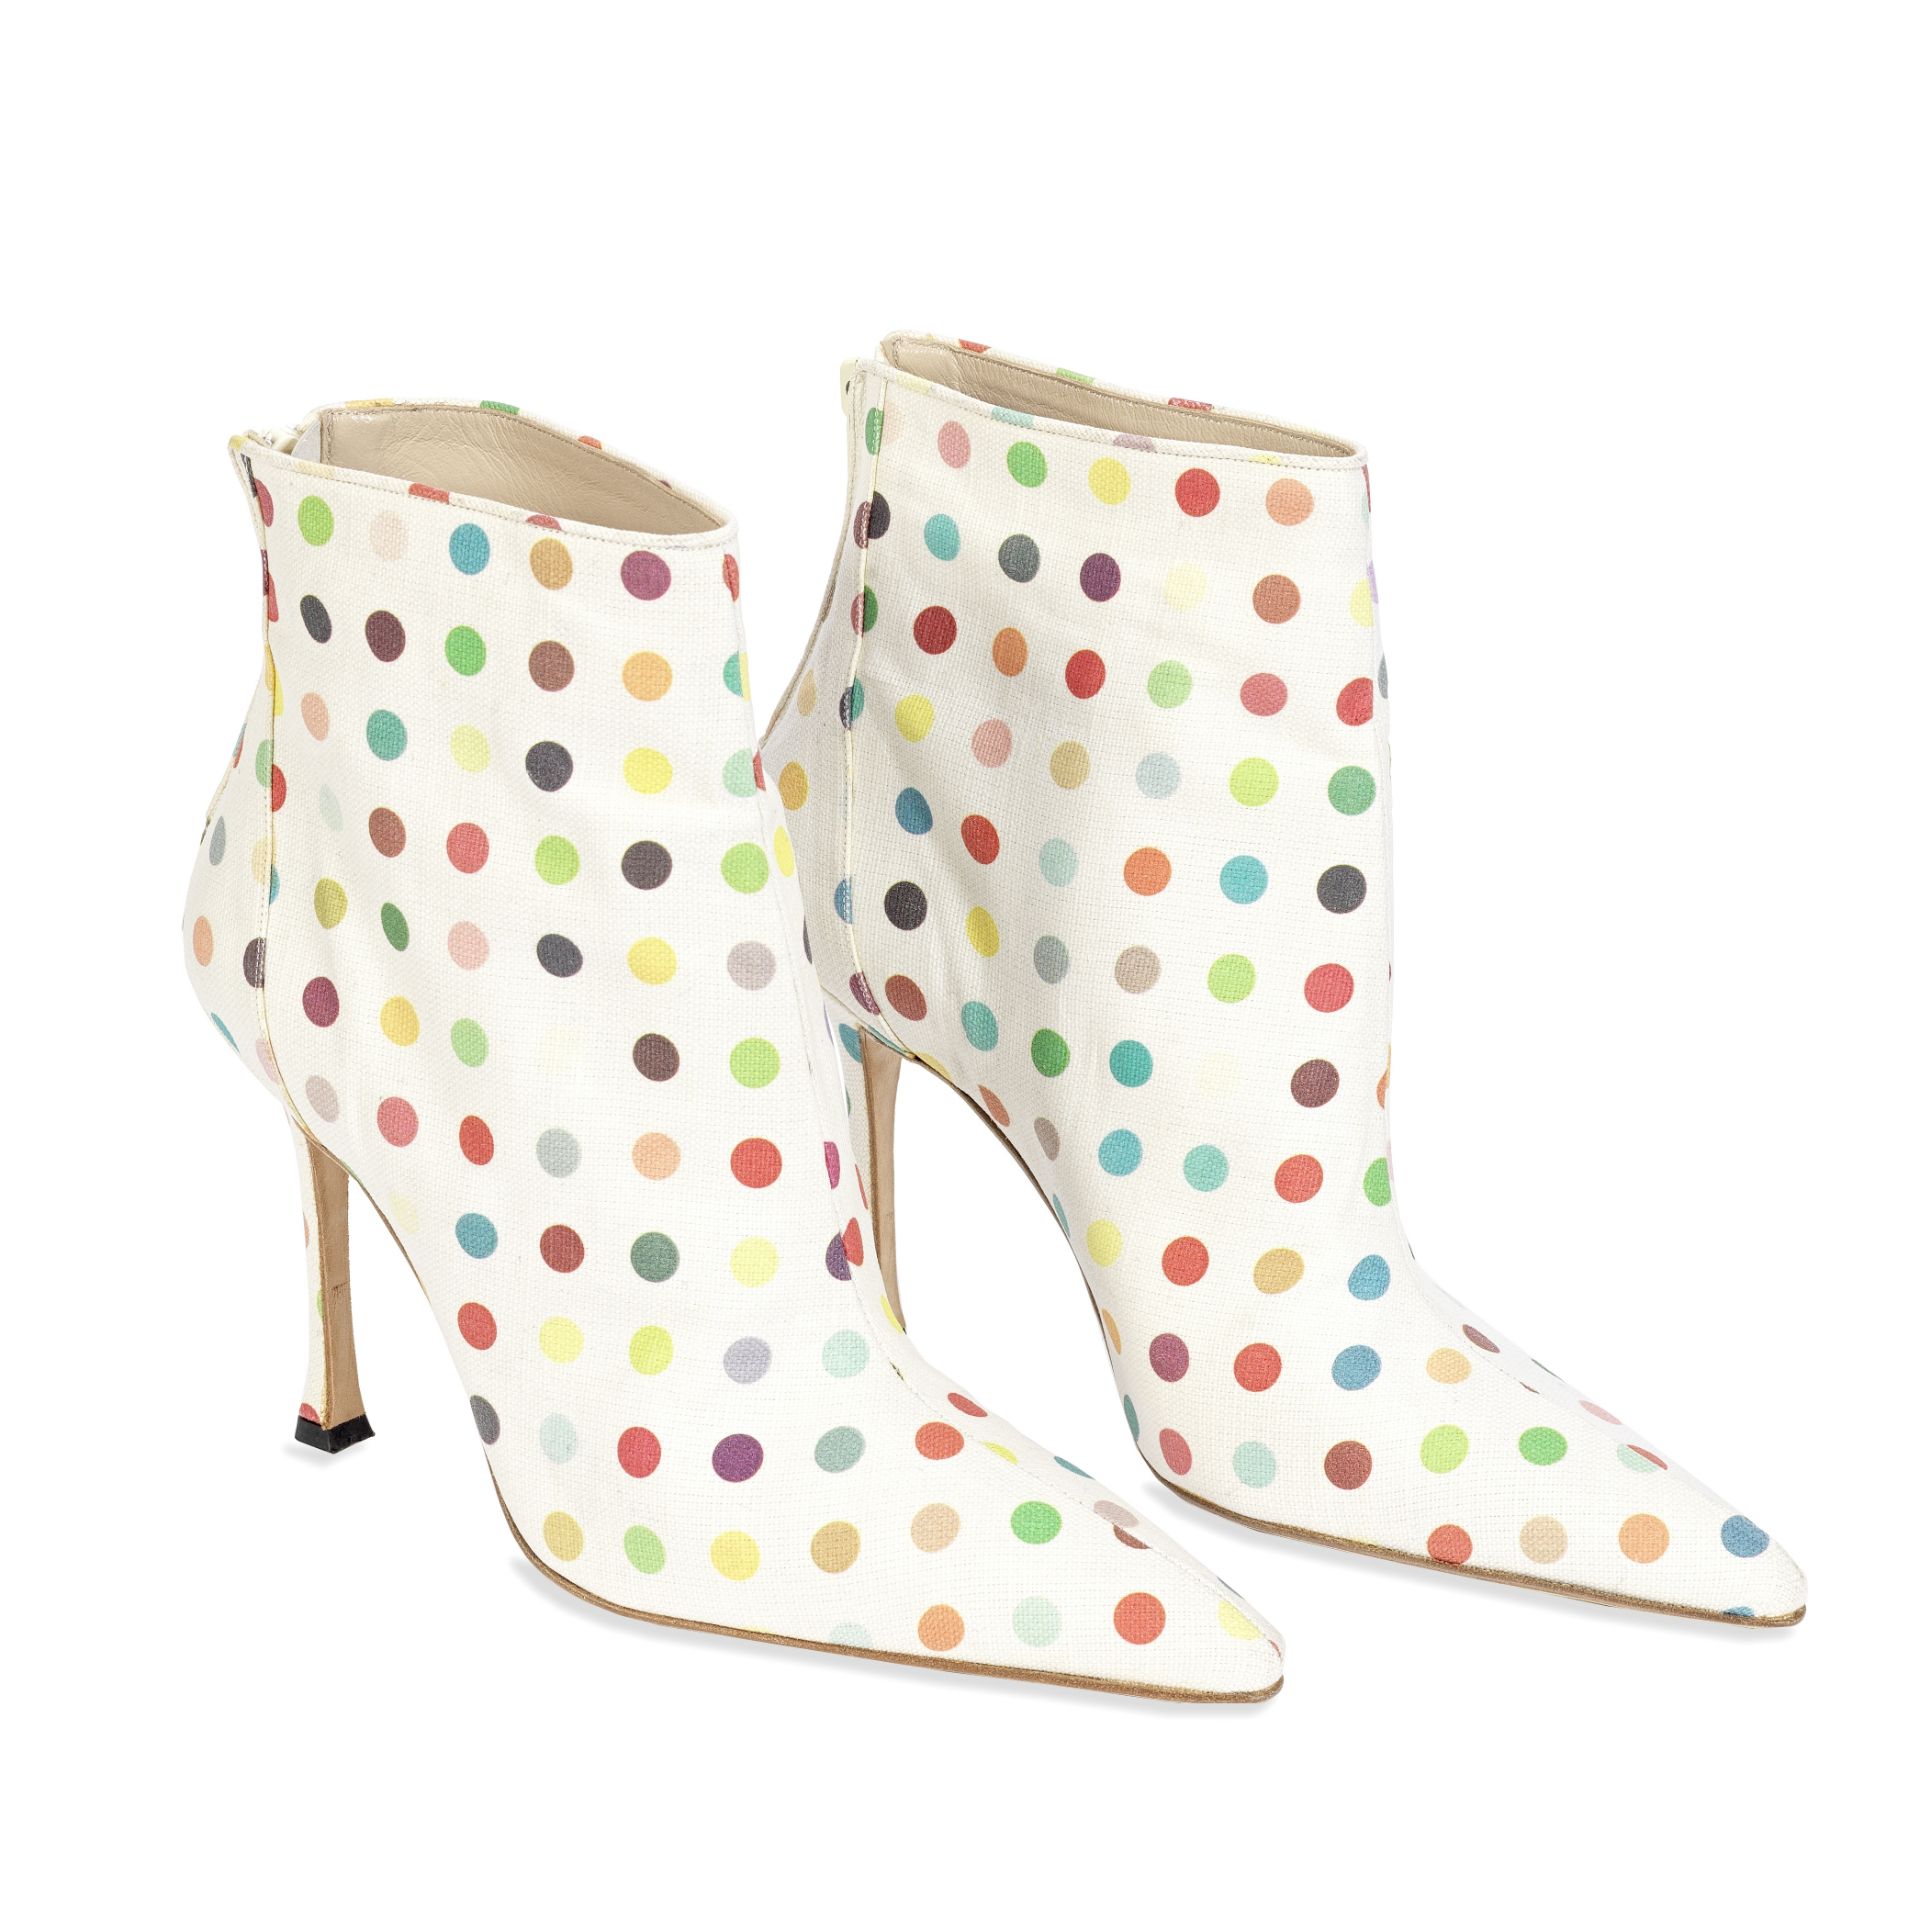 Damien Hirst For Manolo Blahnik Spot Boots, 2002 (includes dust bag and box)